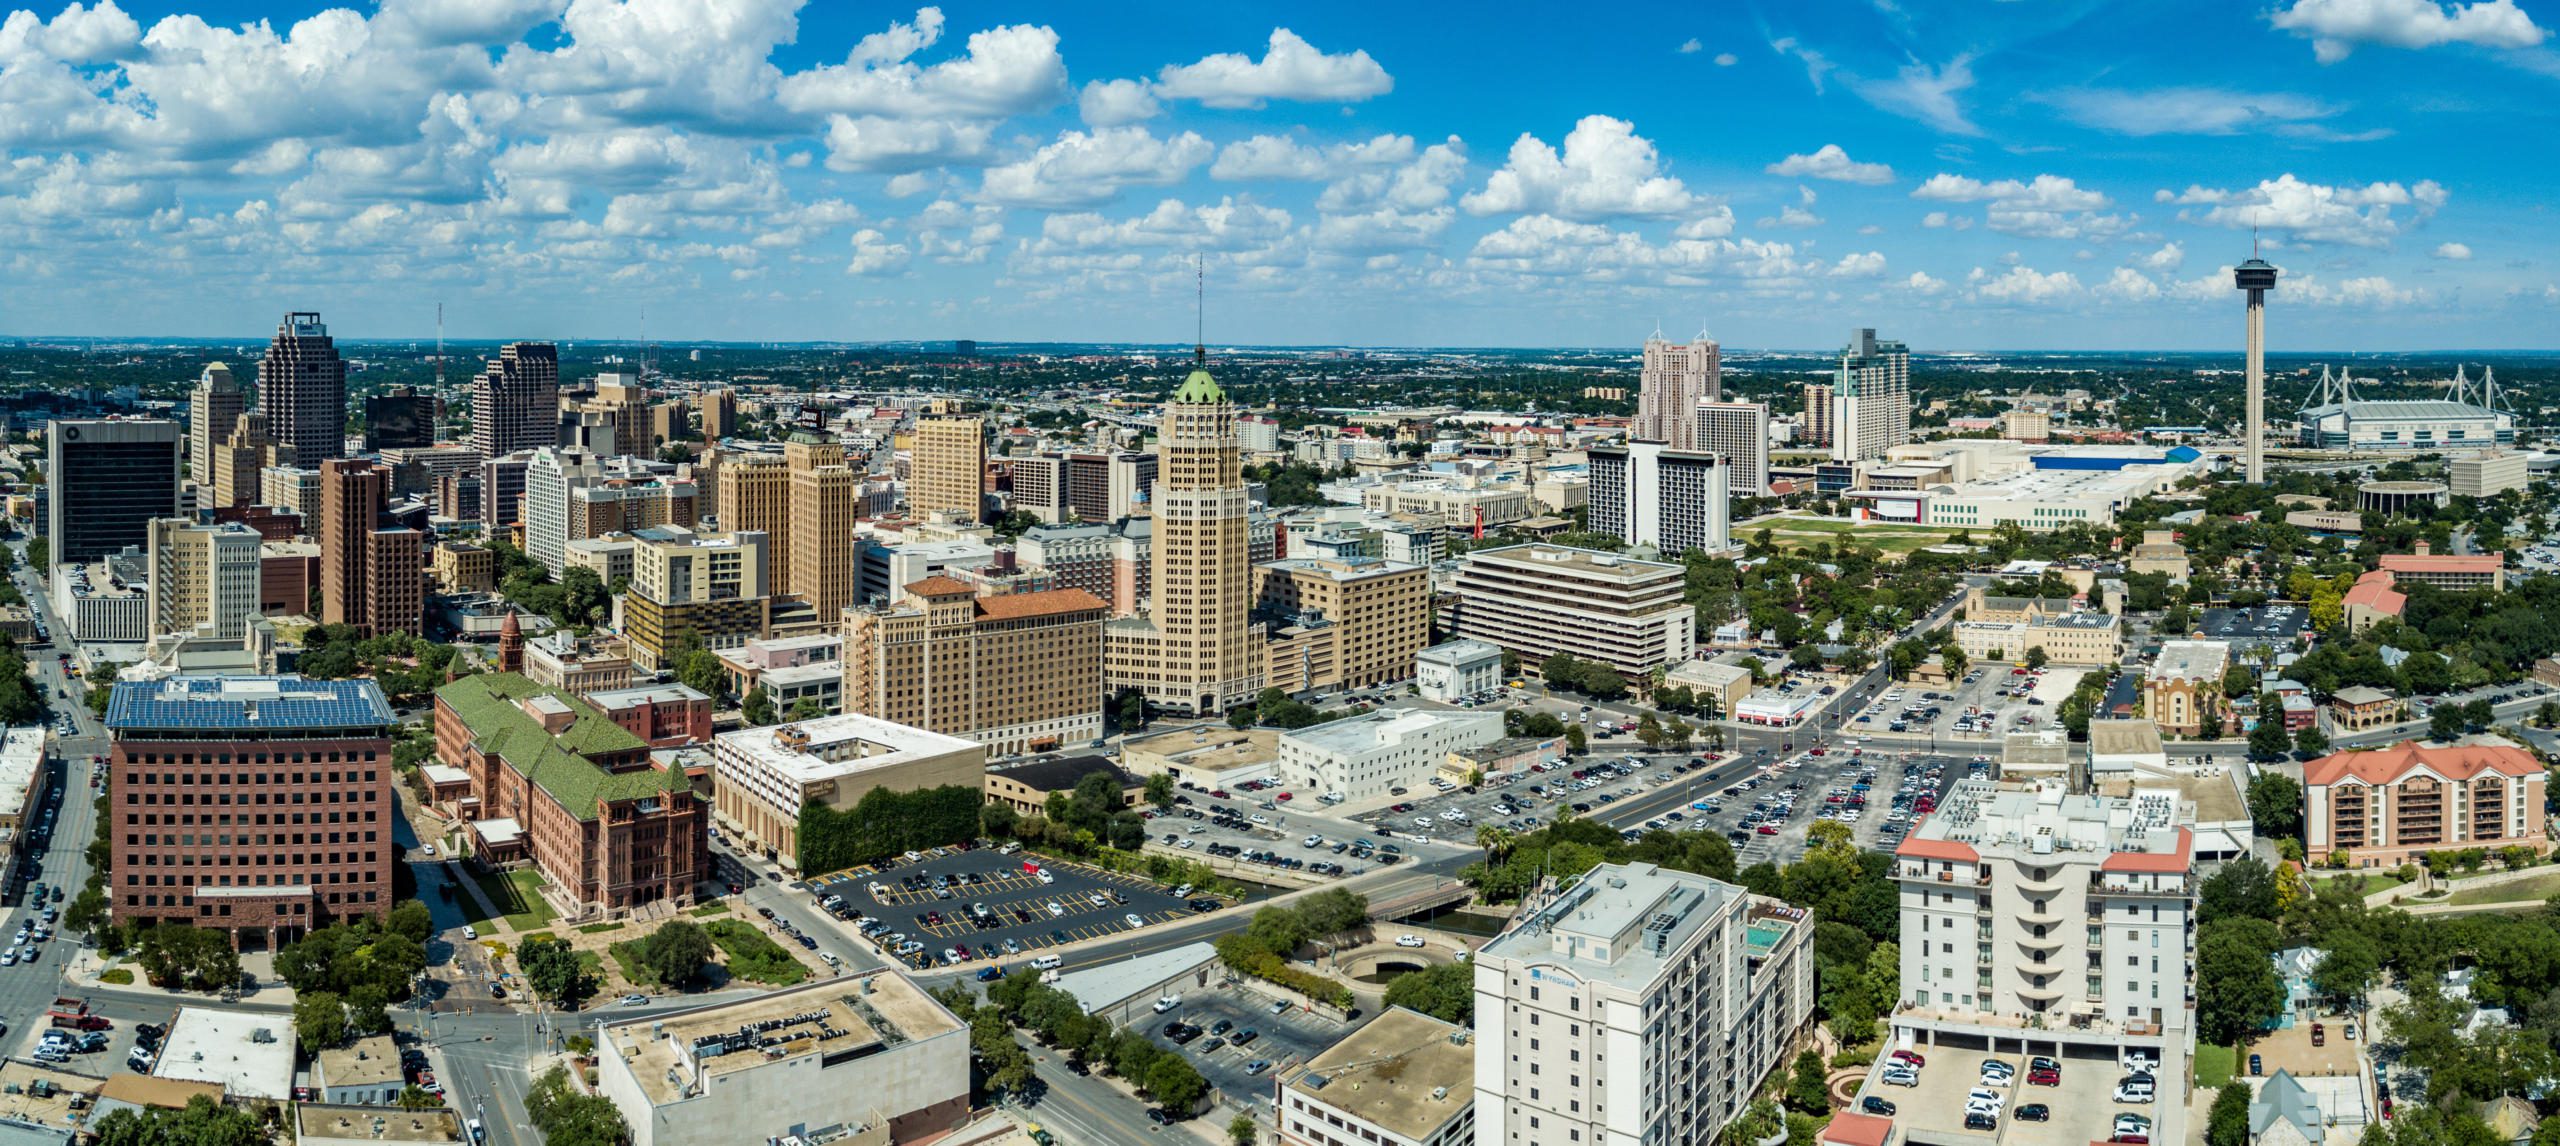 Arial view of downtown San Antonio